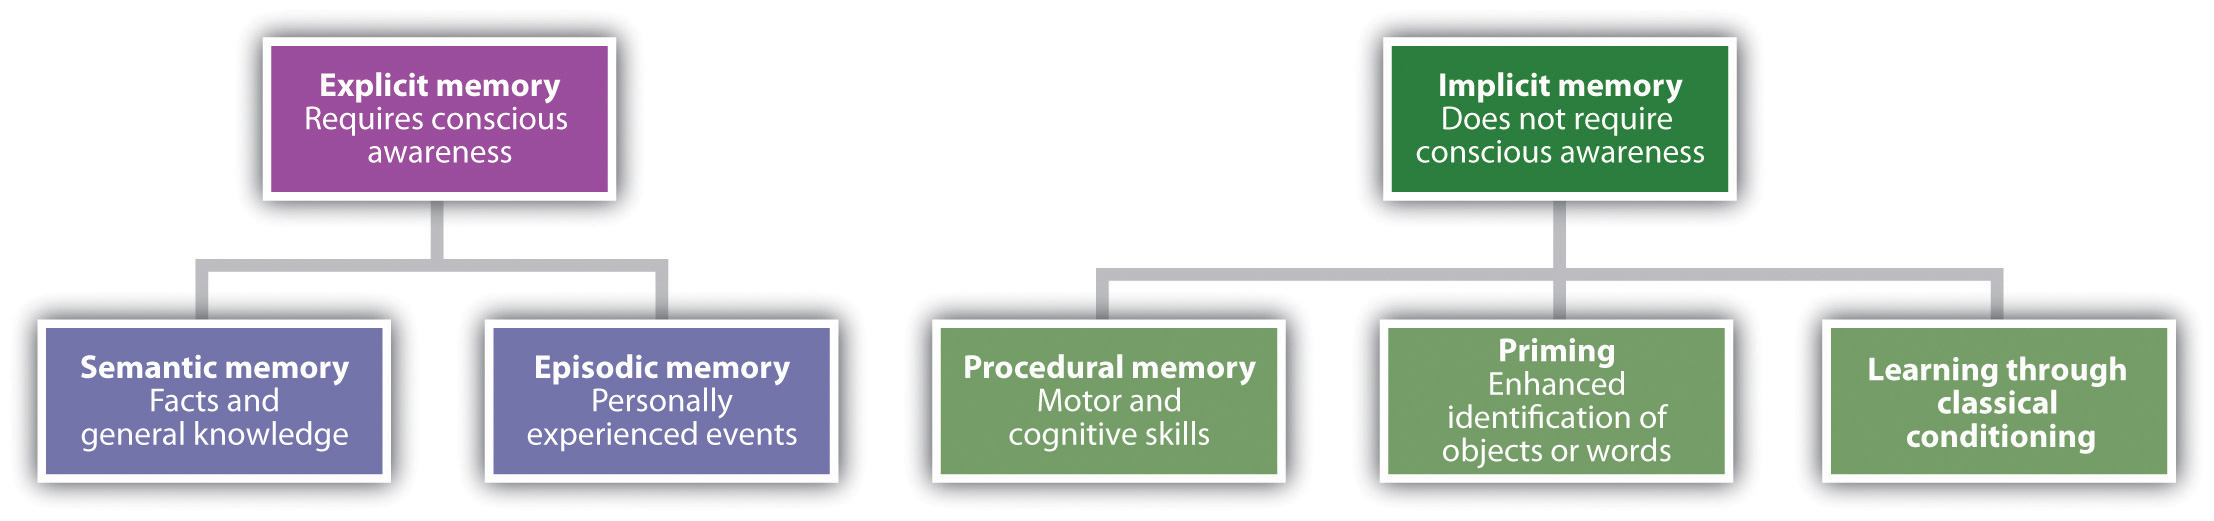 Types of Memory: Explicit memory (Semantic and Episodic memory) and Implicit memory (Procedural memory, Priming, and Learning through classical conditioning).